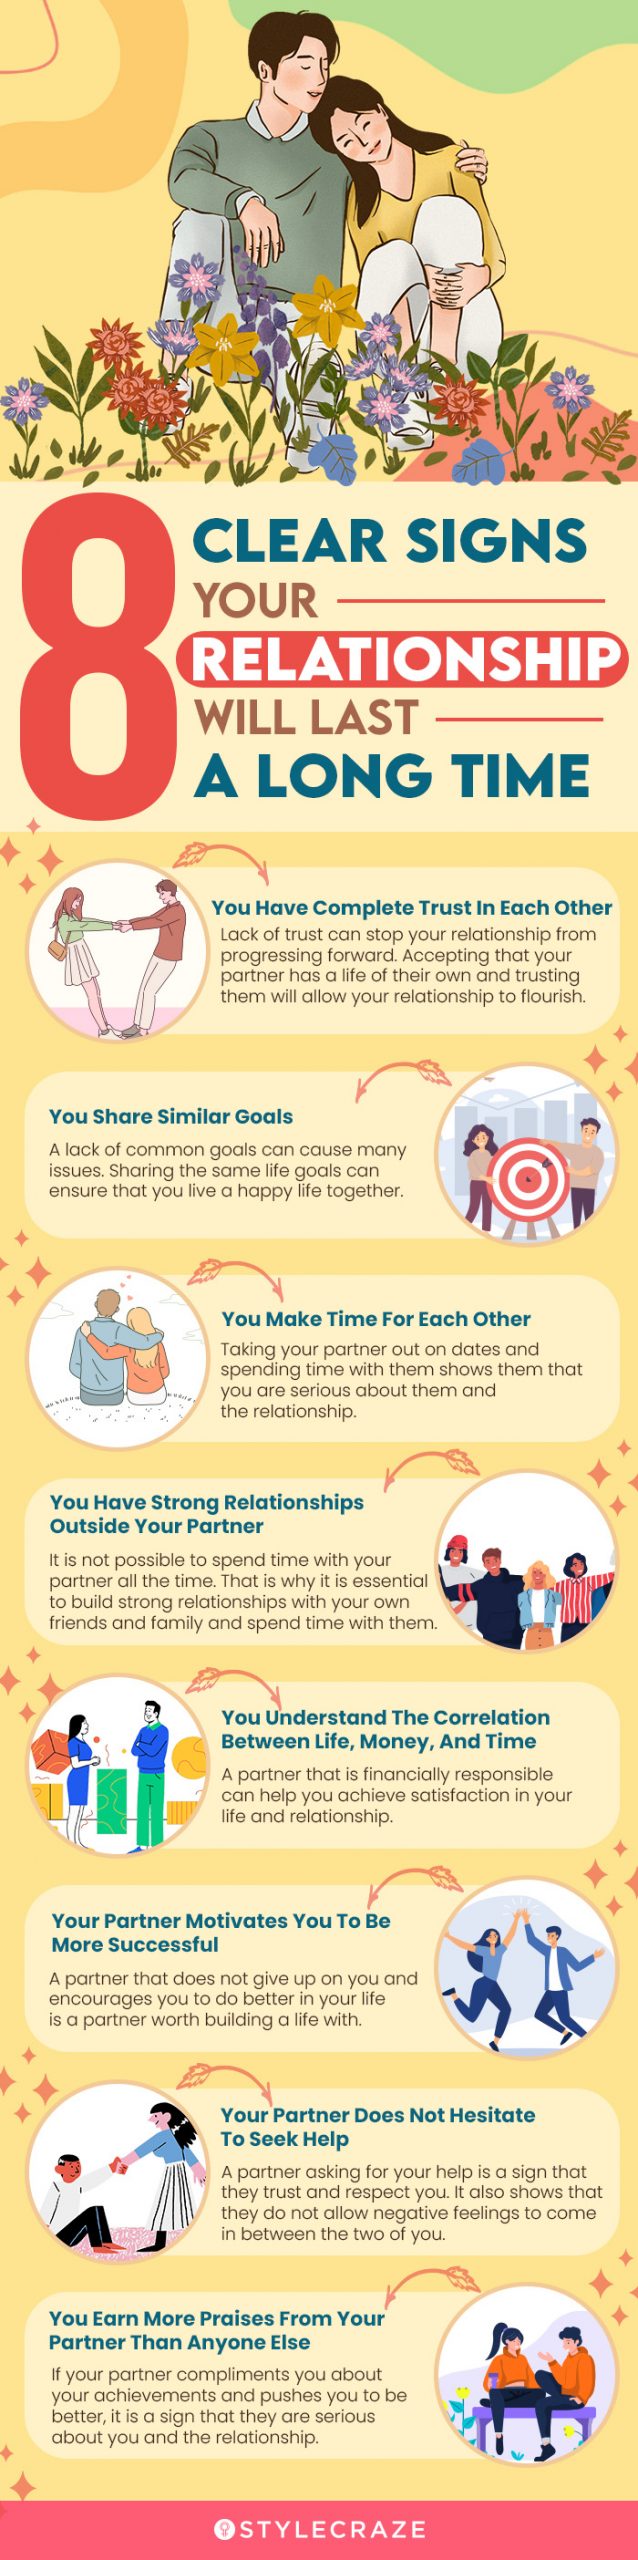 8 clear signs your relationship will last a long time (infographic)